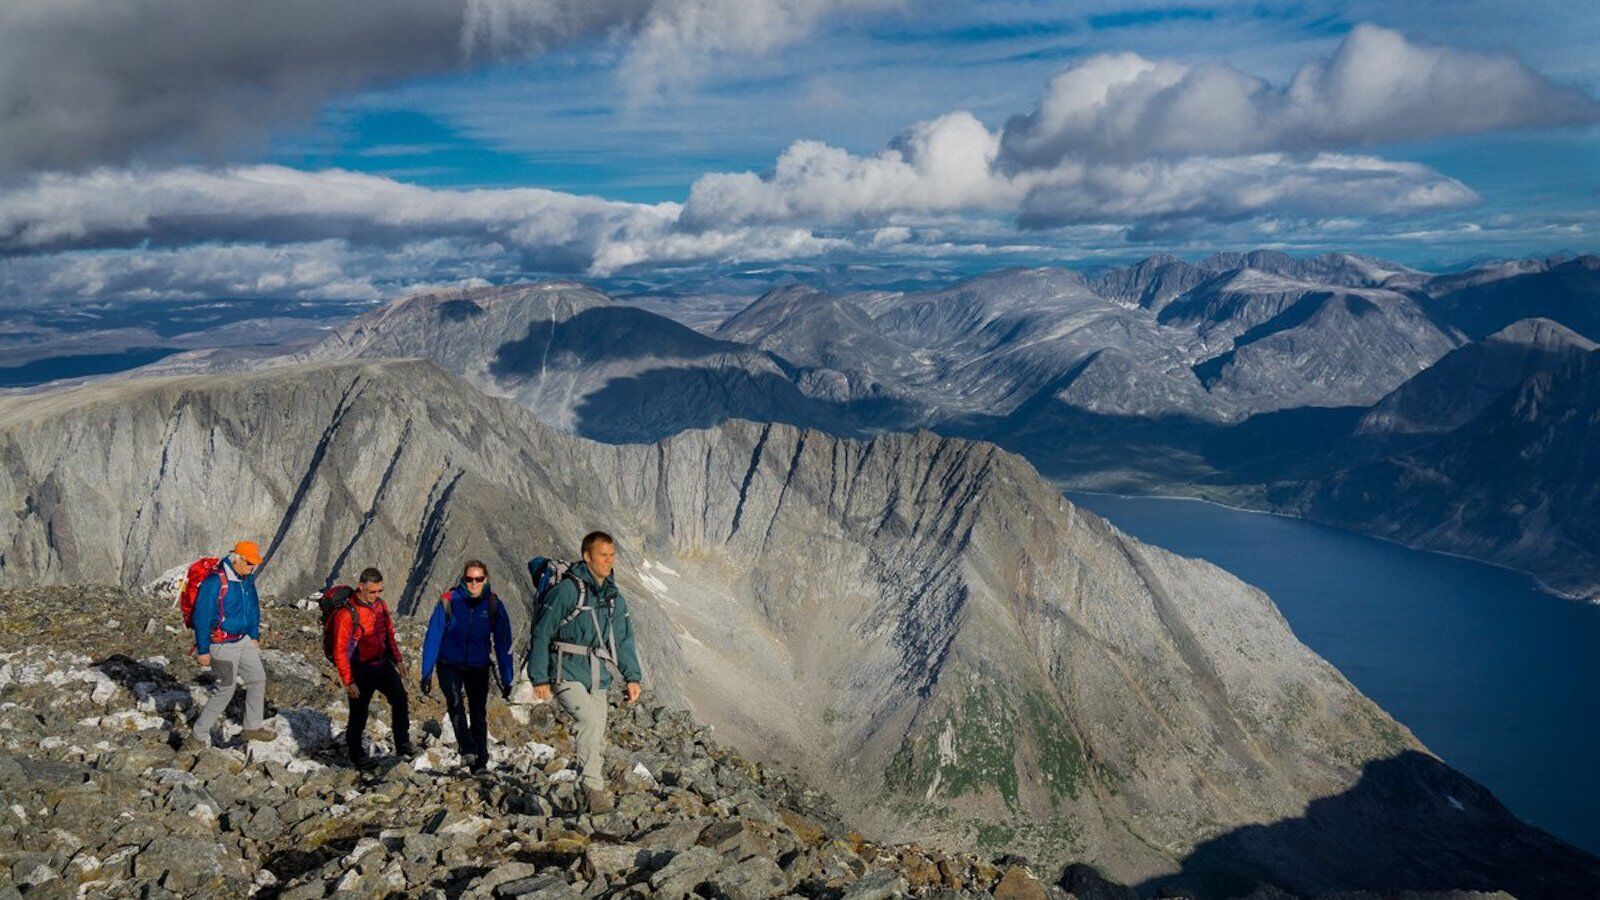 Hiking in the Torngat mountains in Nunavik